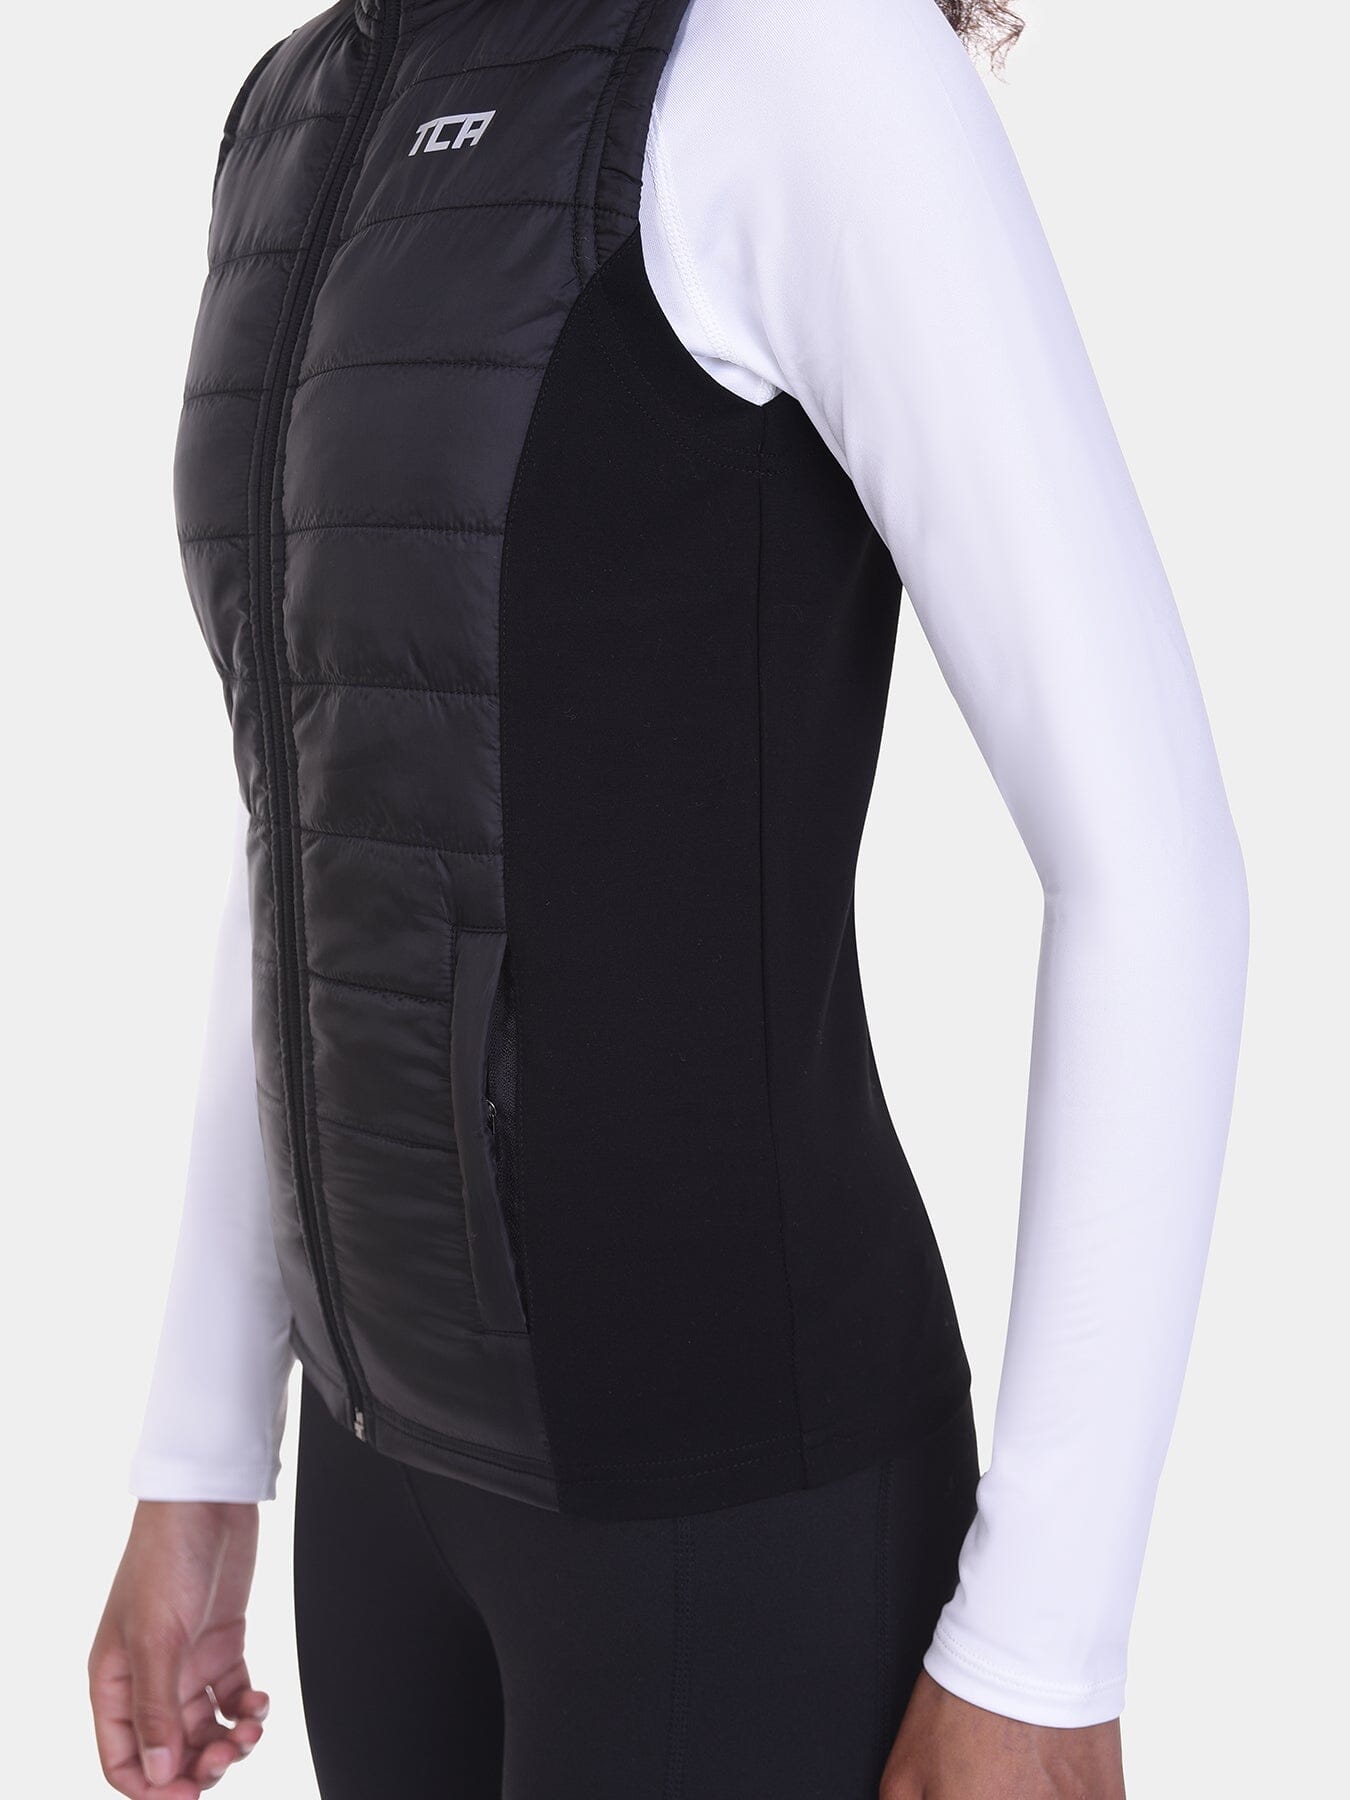 Excel Padded Running Gilet For Girls With Zip Pockets & Reflective Strips